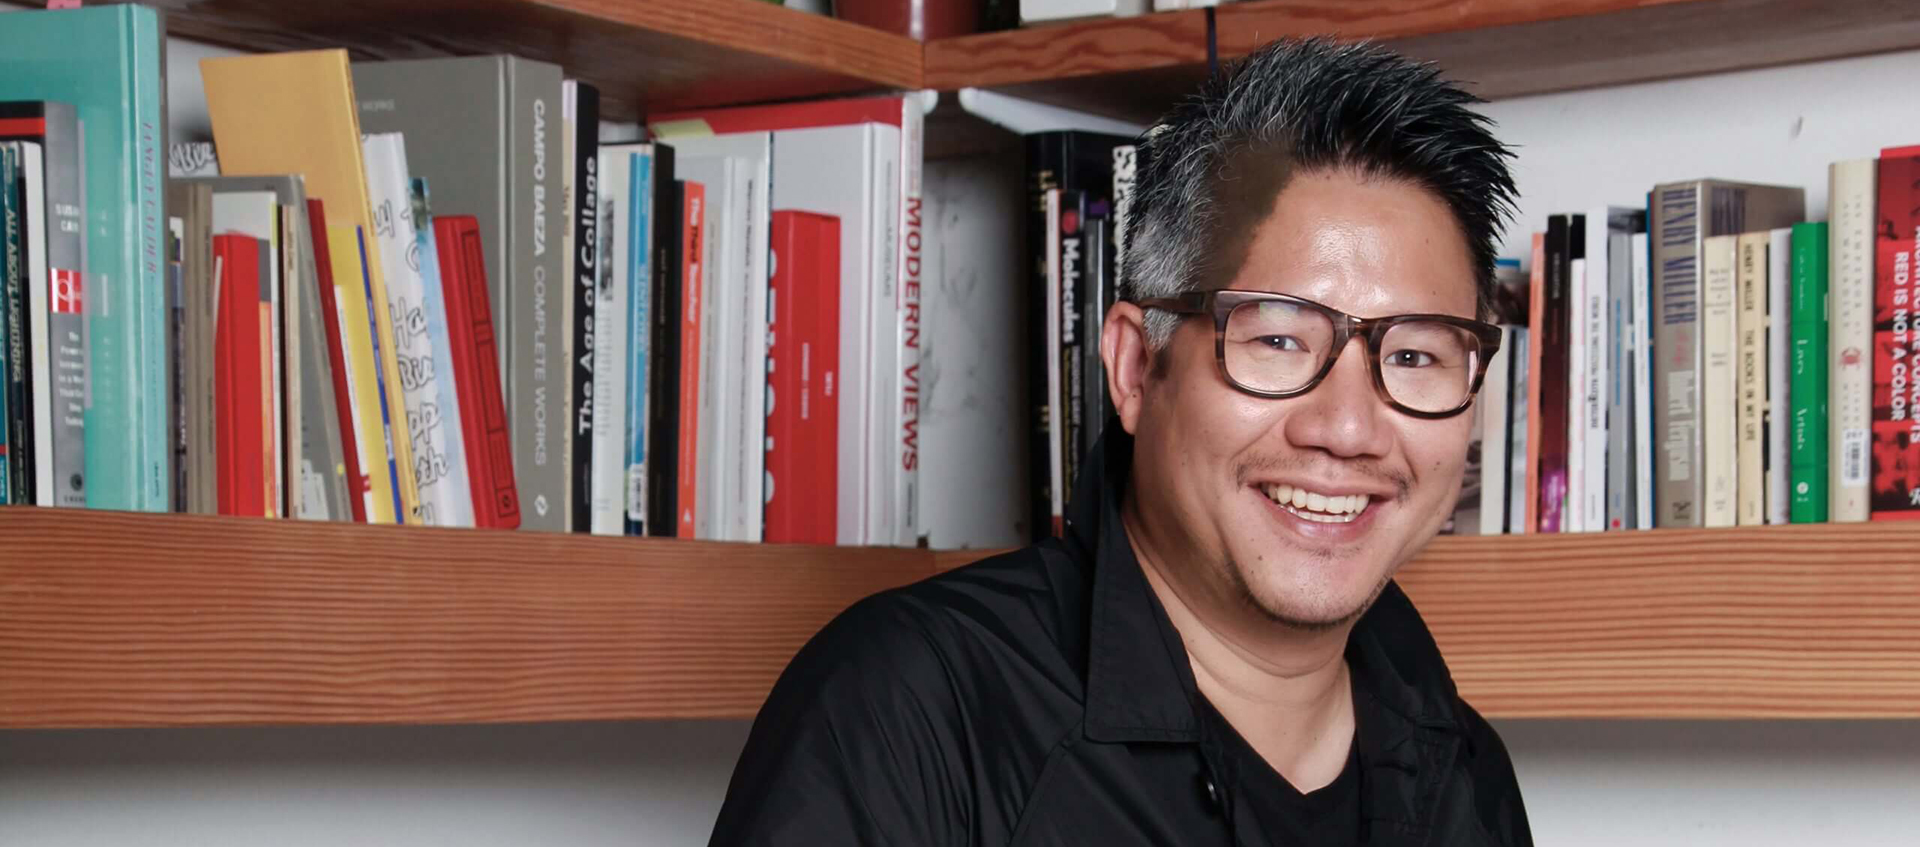 Kulapat Yantrasast, a man of Thai descent, stands in front of book shelves. He smiles at the camera, wearing a black shirt and glasses. He has short black-and-gray hair. 